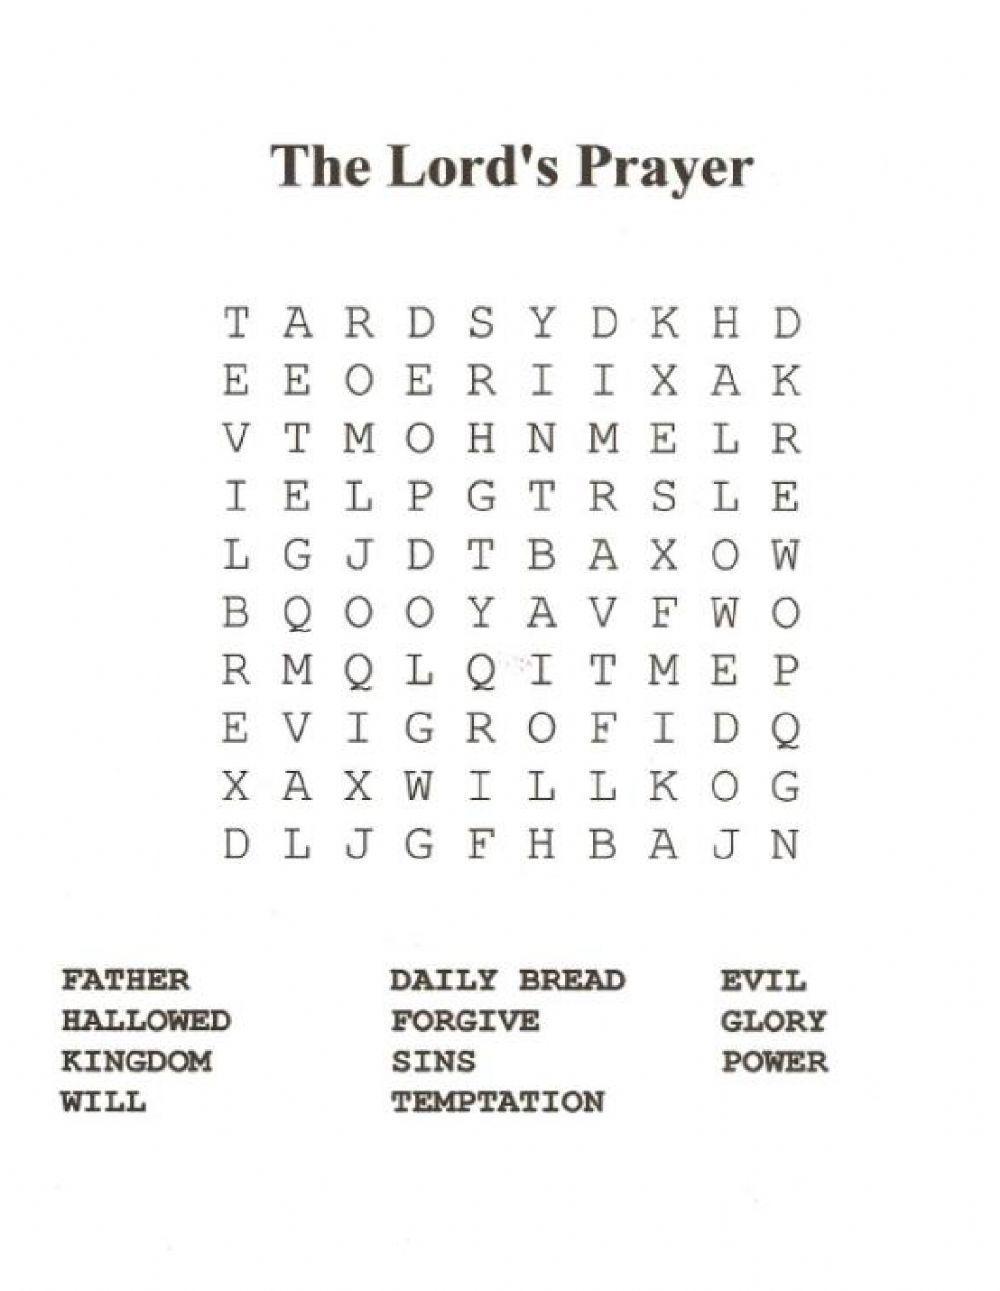 The Lord’s prayer